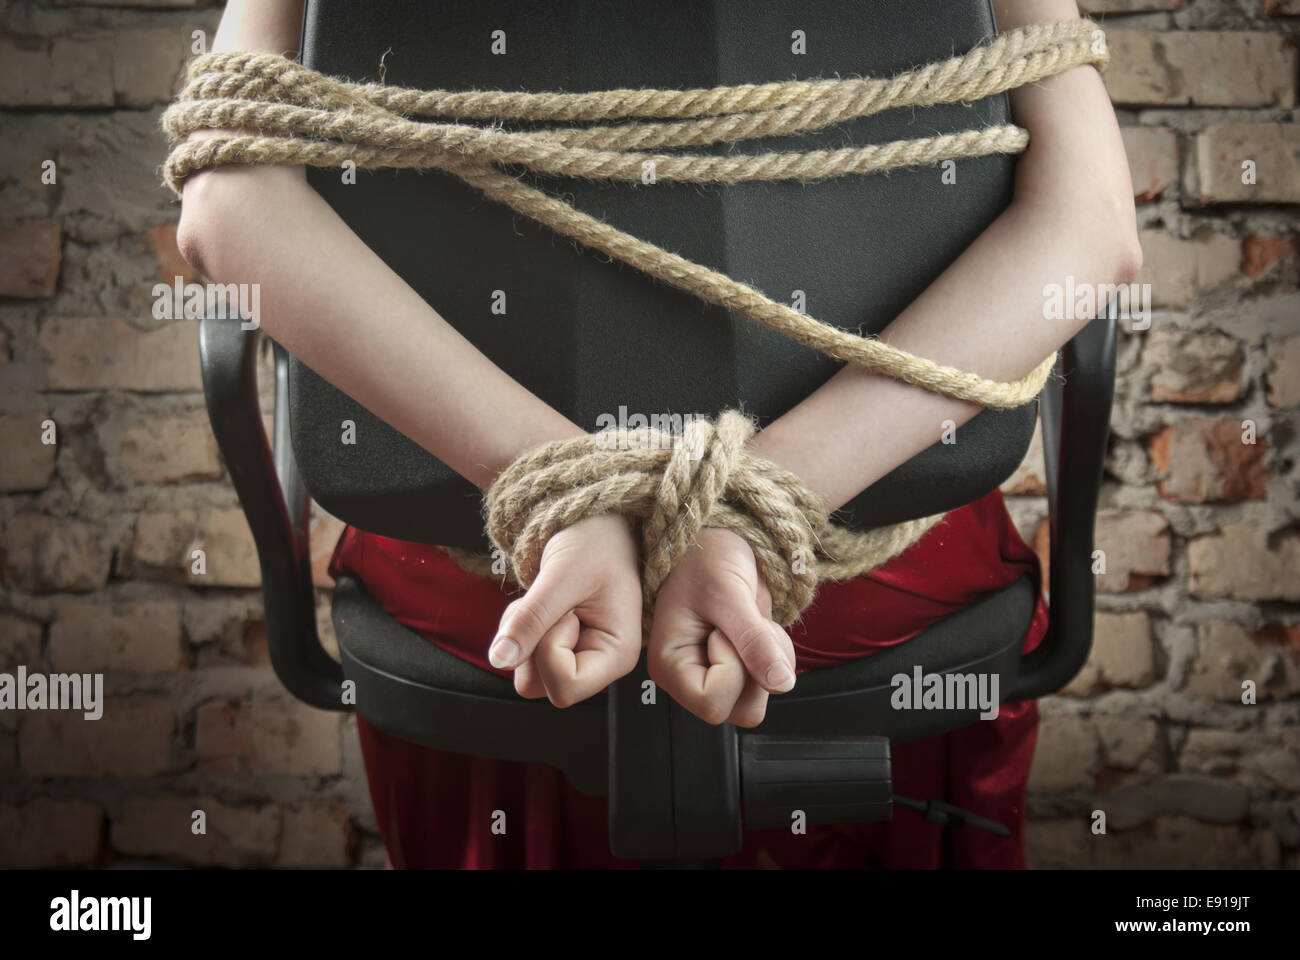 Hands Tied Up With Rope Stock Photo By ©AndreyKr 9097352, 54% OFF